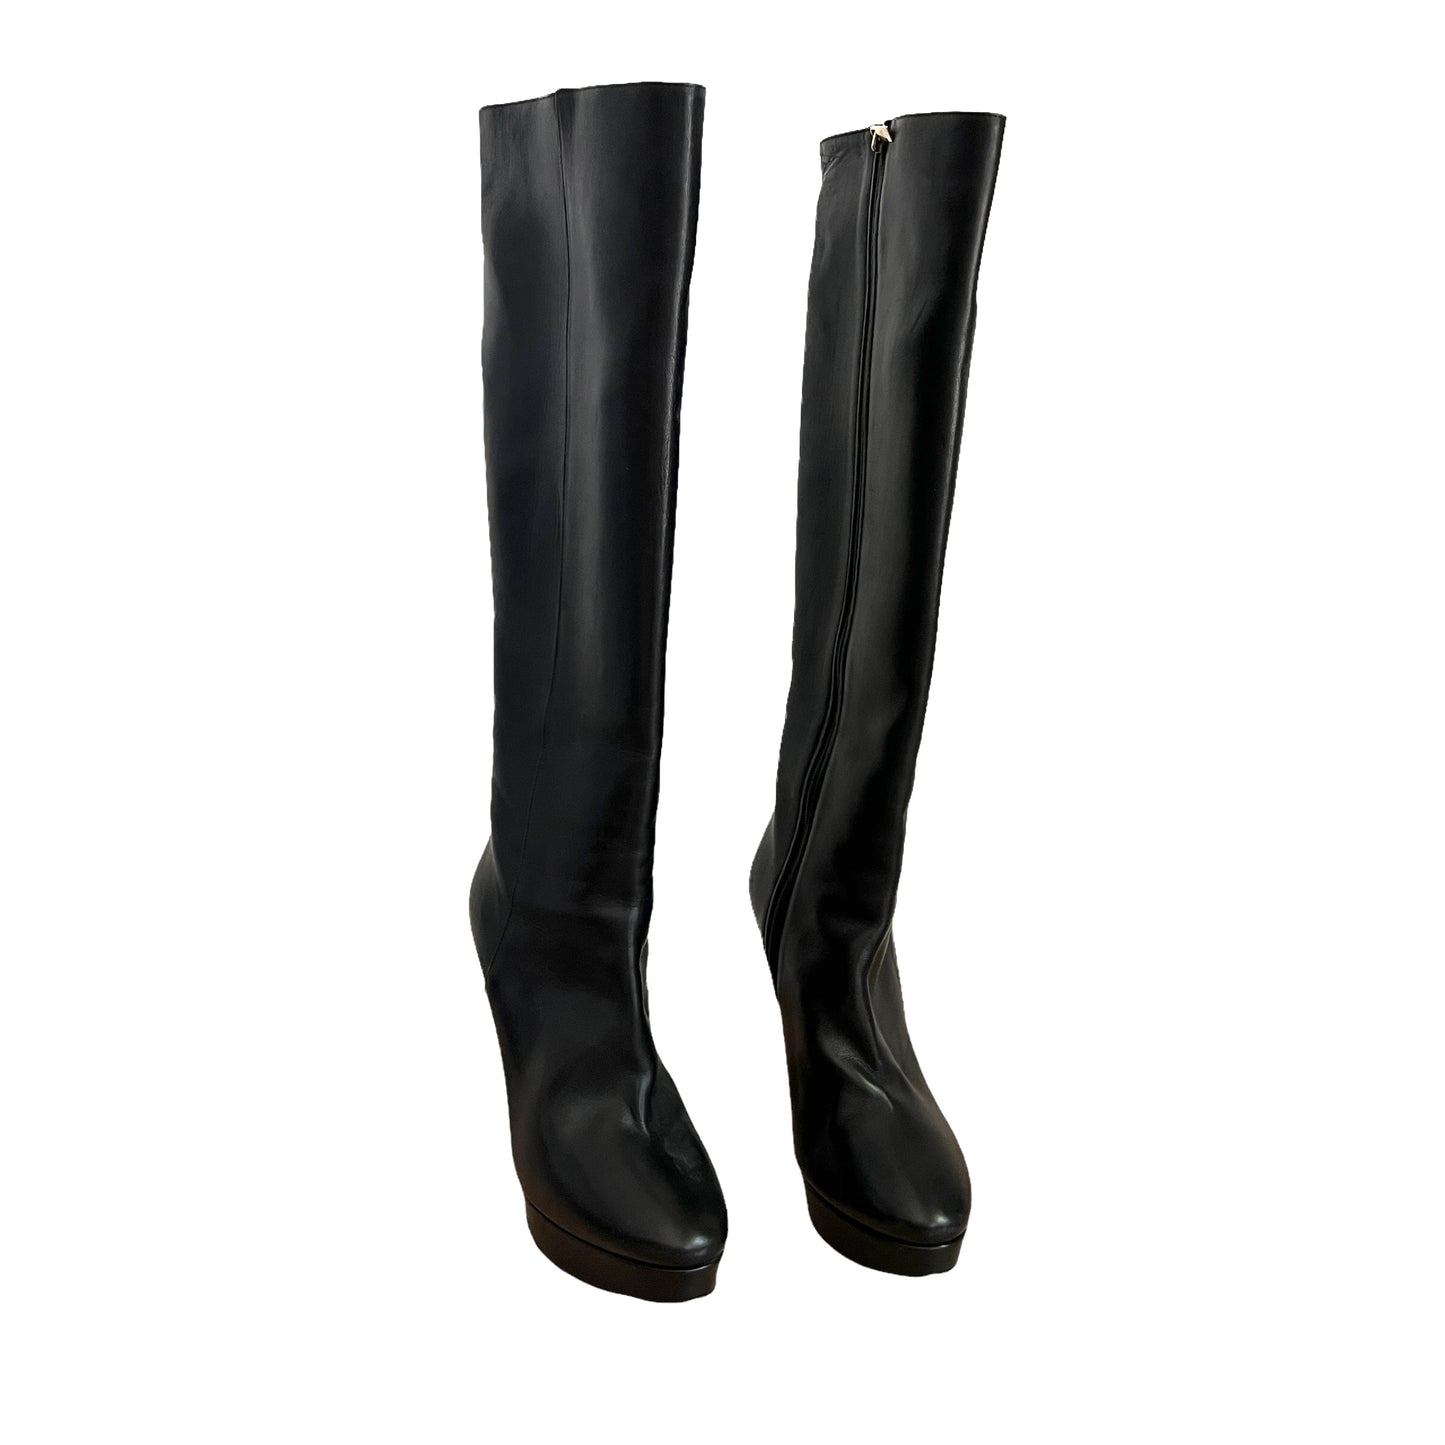 Black Leather Tall Boots - 10.5